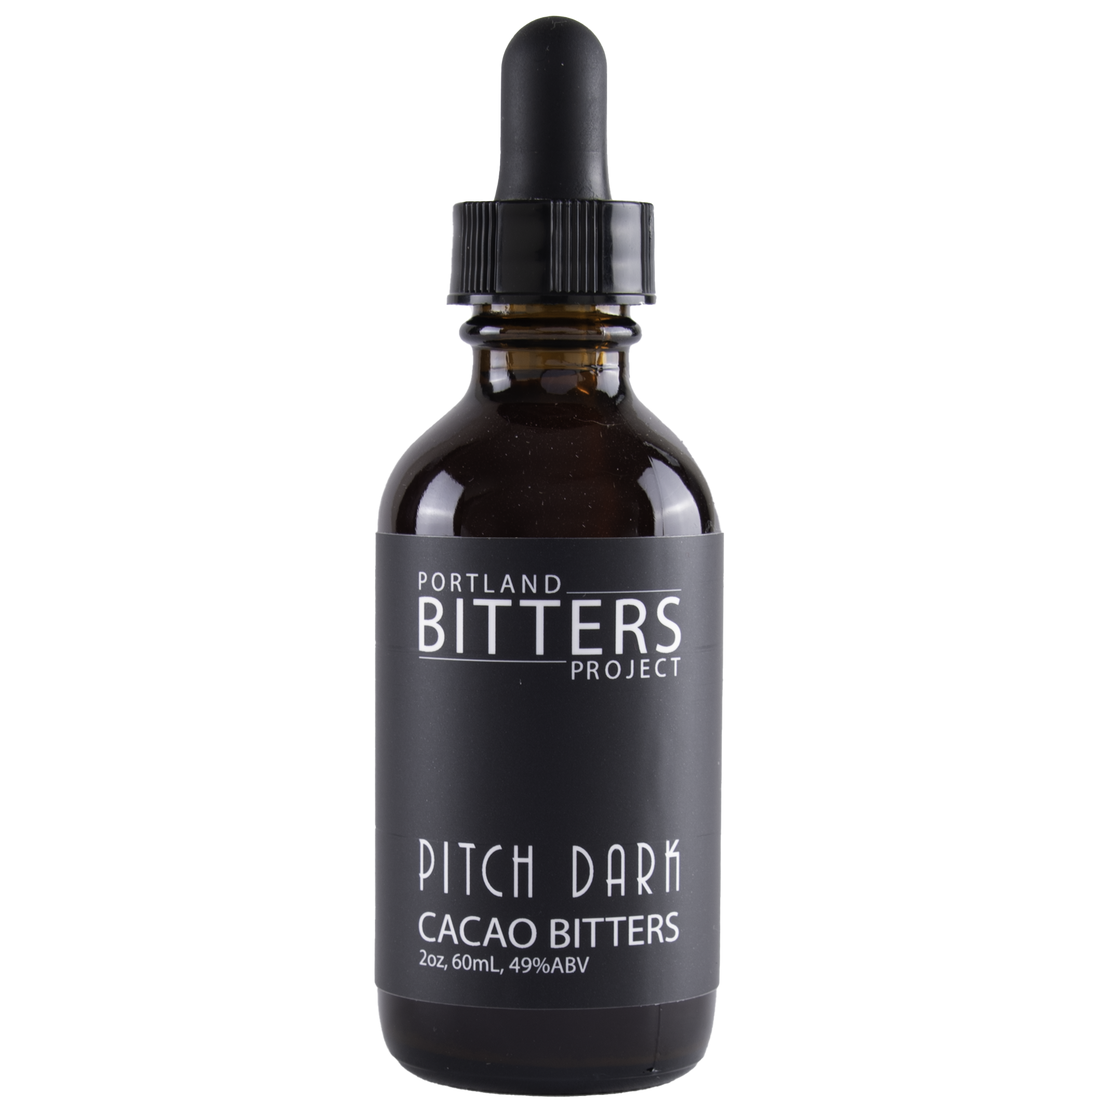 Pitch Dark Cacao Bitters - The Lake and Company